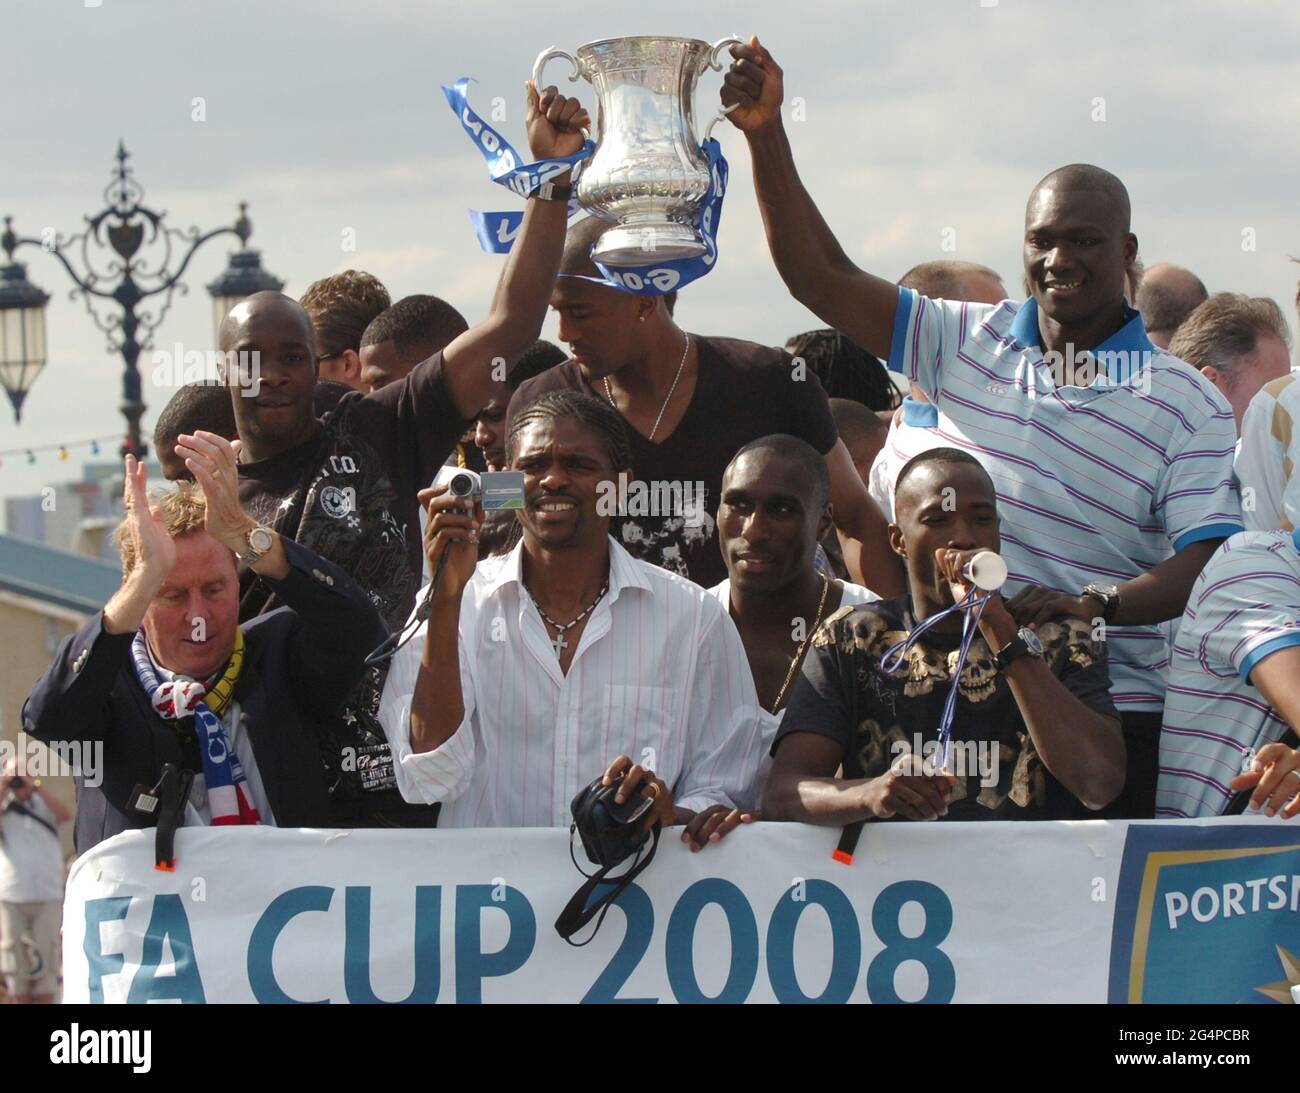 PORTSMOUTH FC, POMPEY, FA CUP,HARRY REDKNAPP, LASSANA DIARRA, KANU, DISTIN SILVAIN, SOL CAMPBELL, JOHN UTAKA AND PAPA BOUBA DIOPON THE OPEN TOP BUS TOURING PORTSMOUTH AFTER THE FA CUP WIN AGAINST CARDIFF. PIC MIKE WALKER,2008 Stock Photo